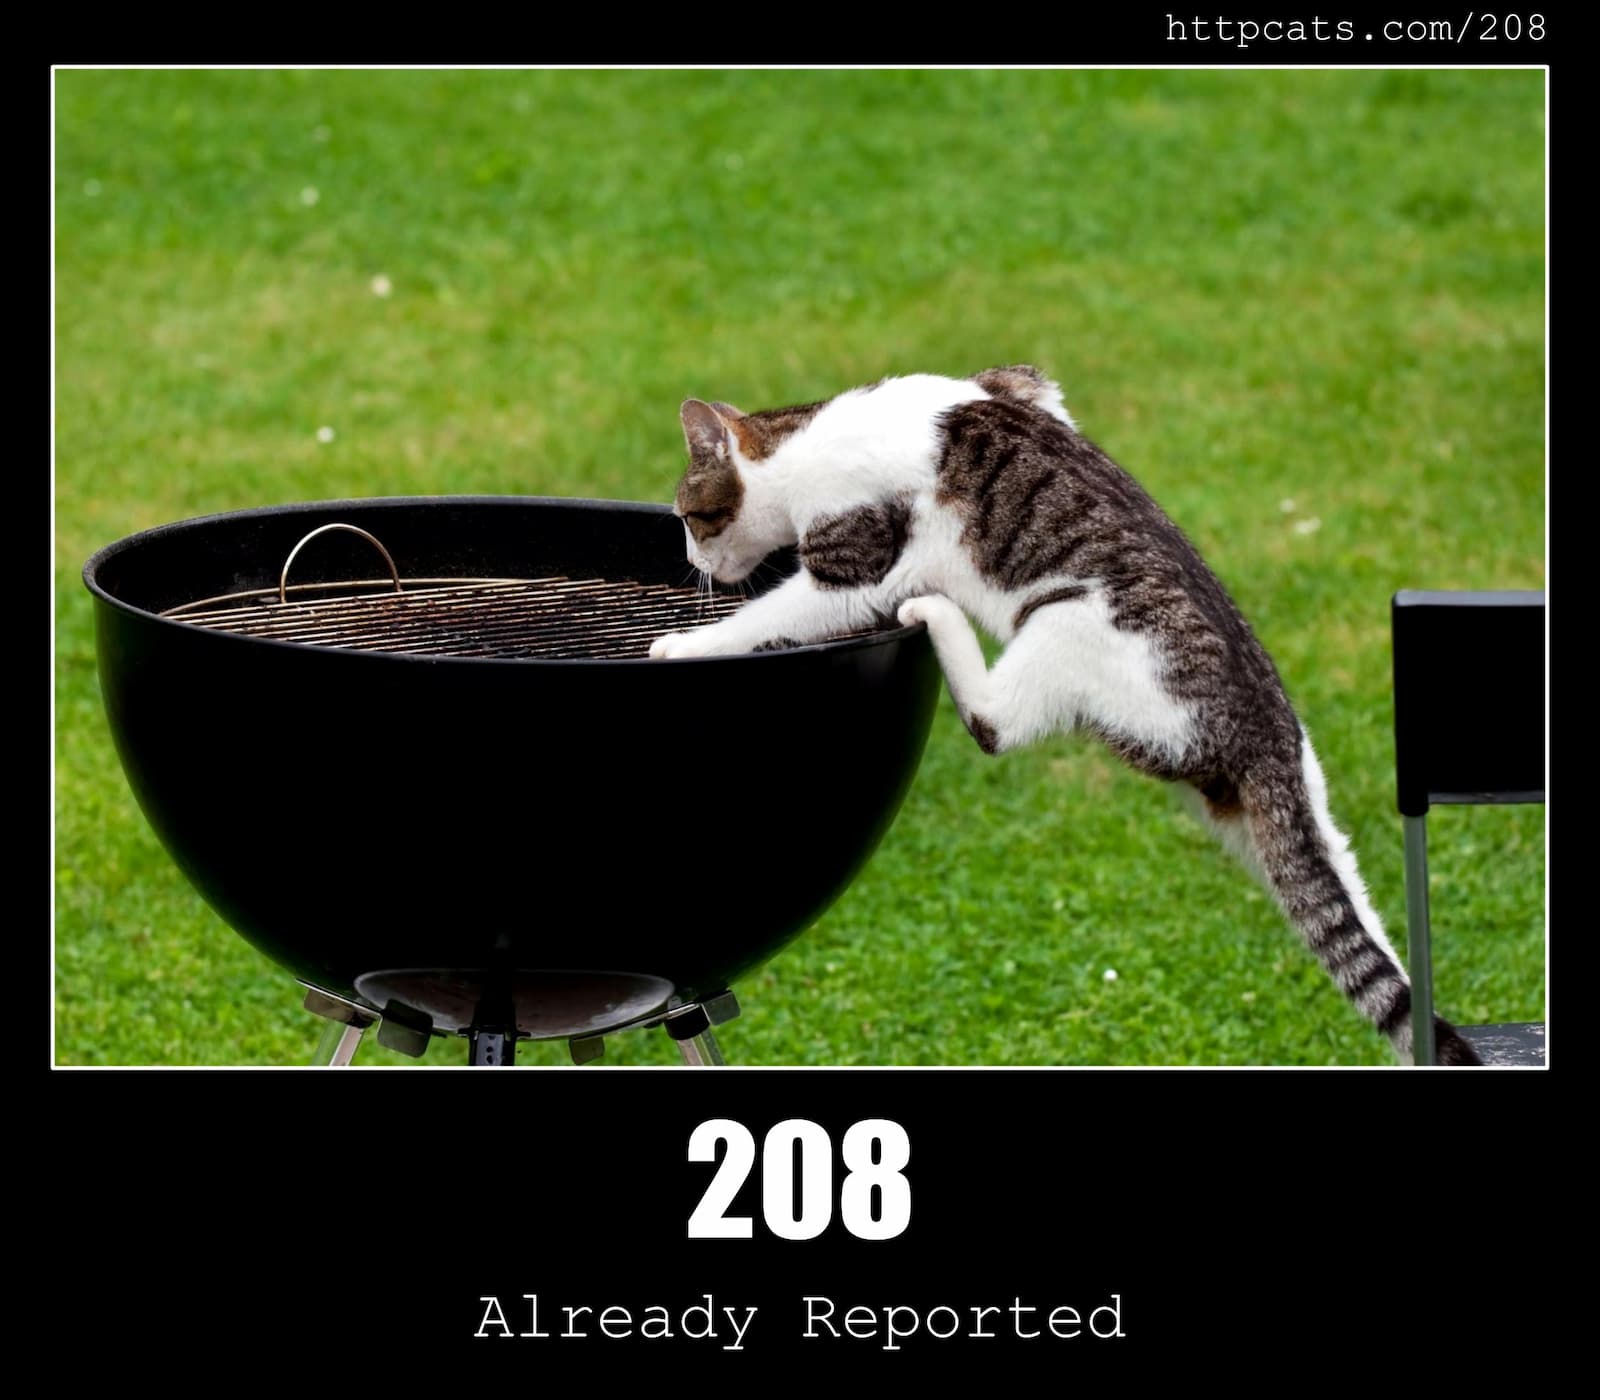 HTTP Status Code 208 Already Reported & Cats